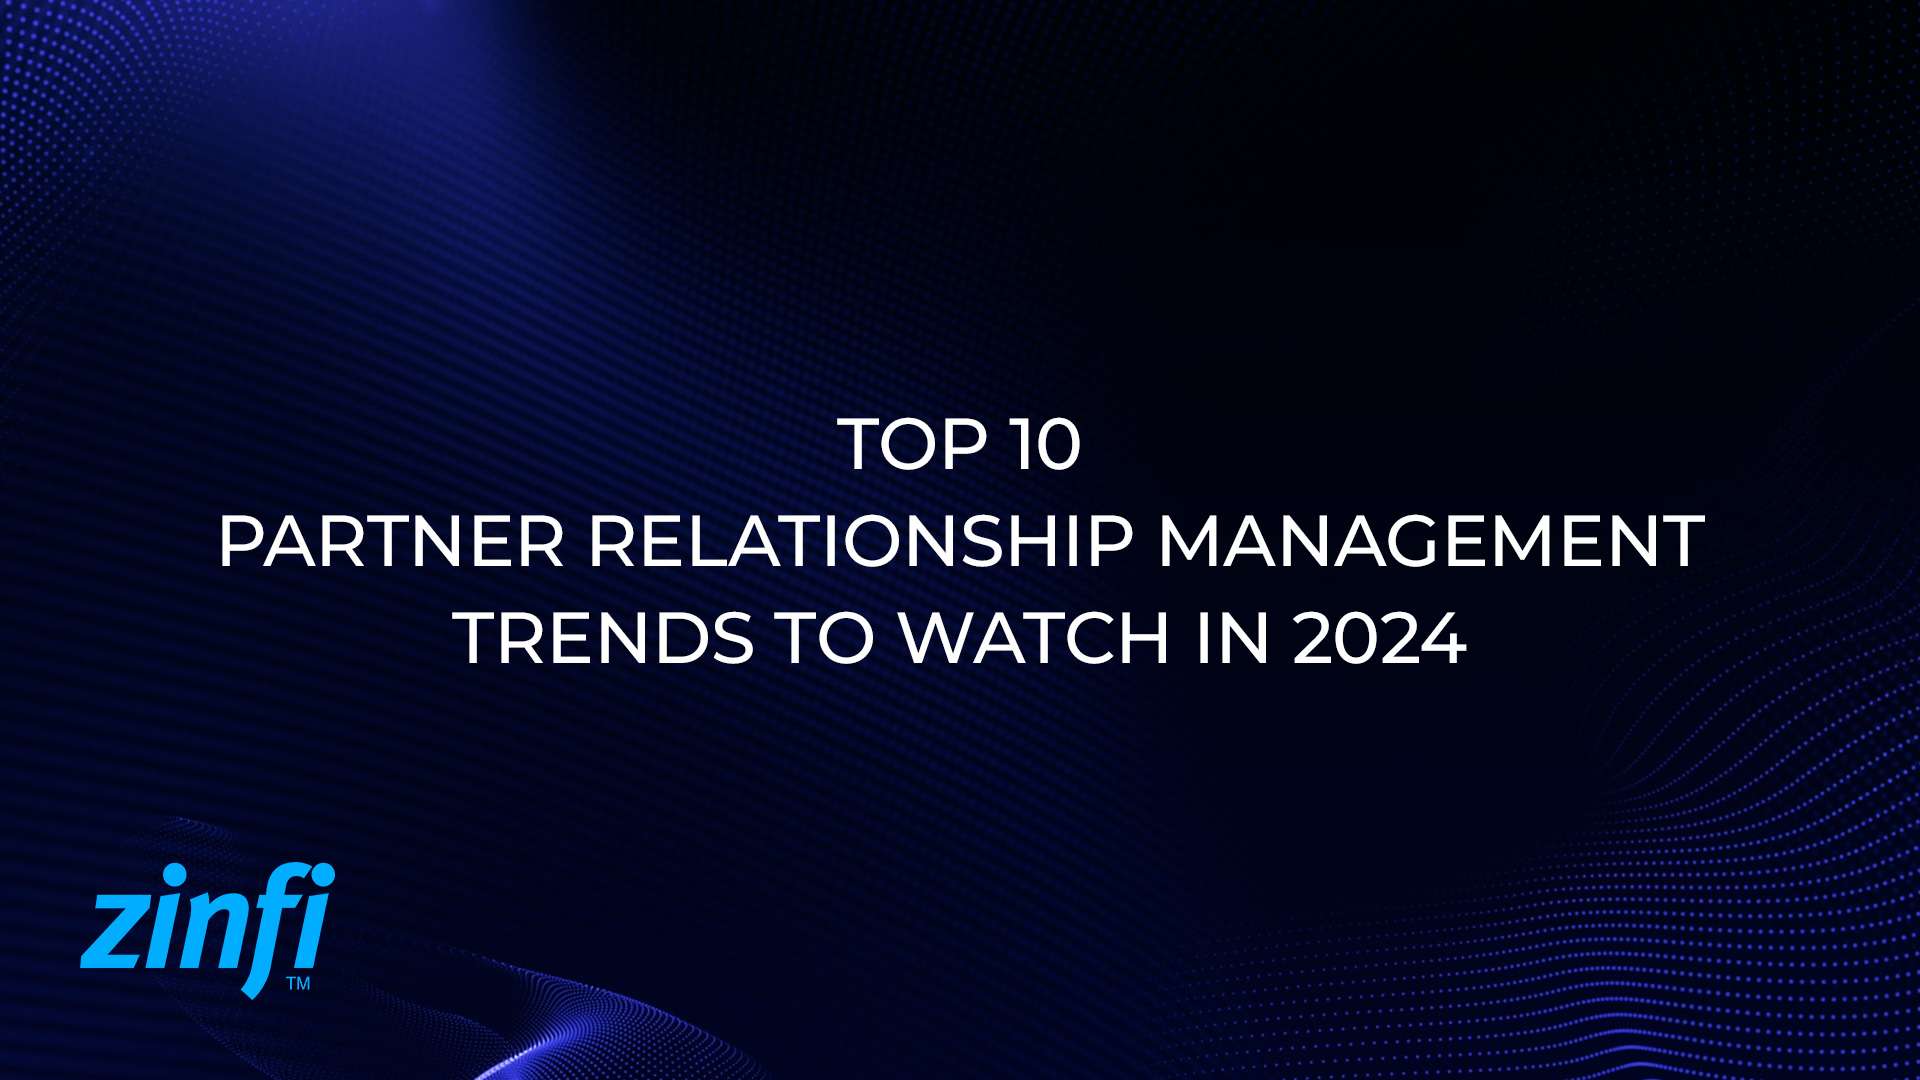 Top 10 Partner Relationship Management Trends to Watch in 2024